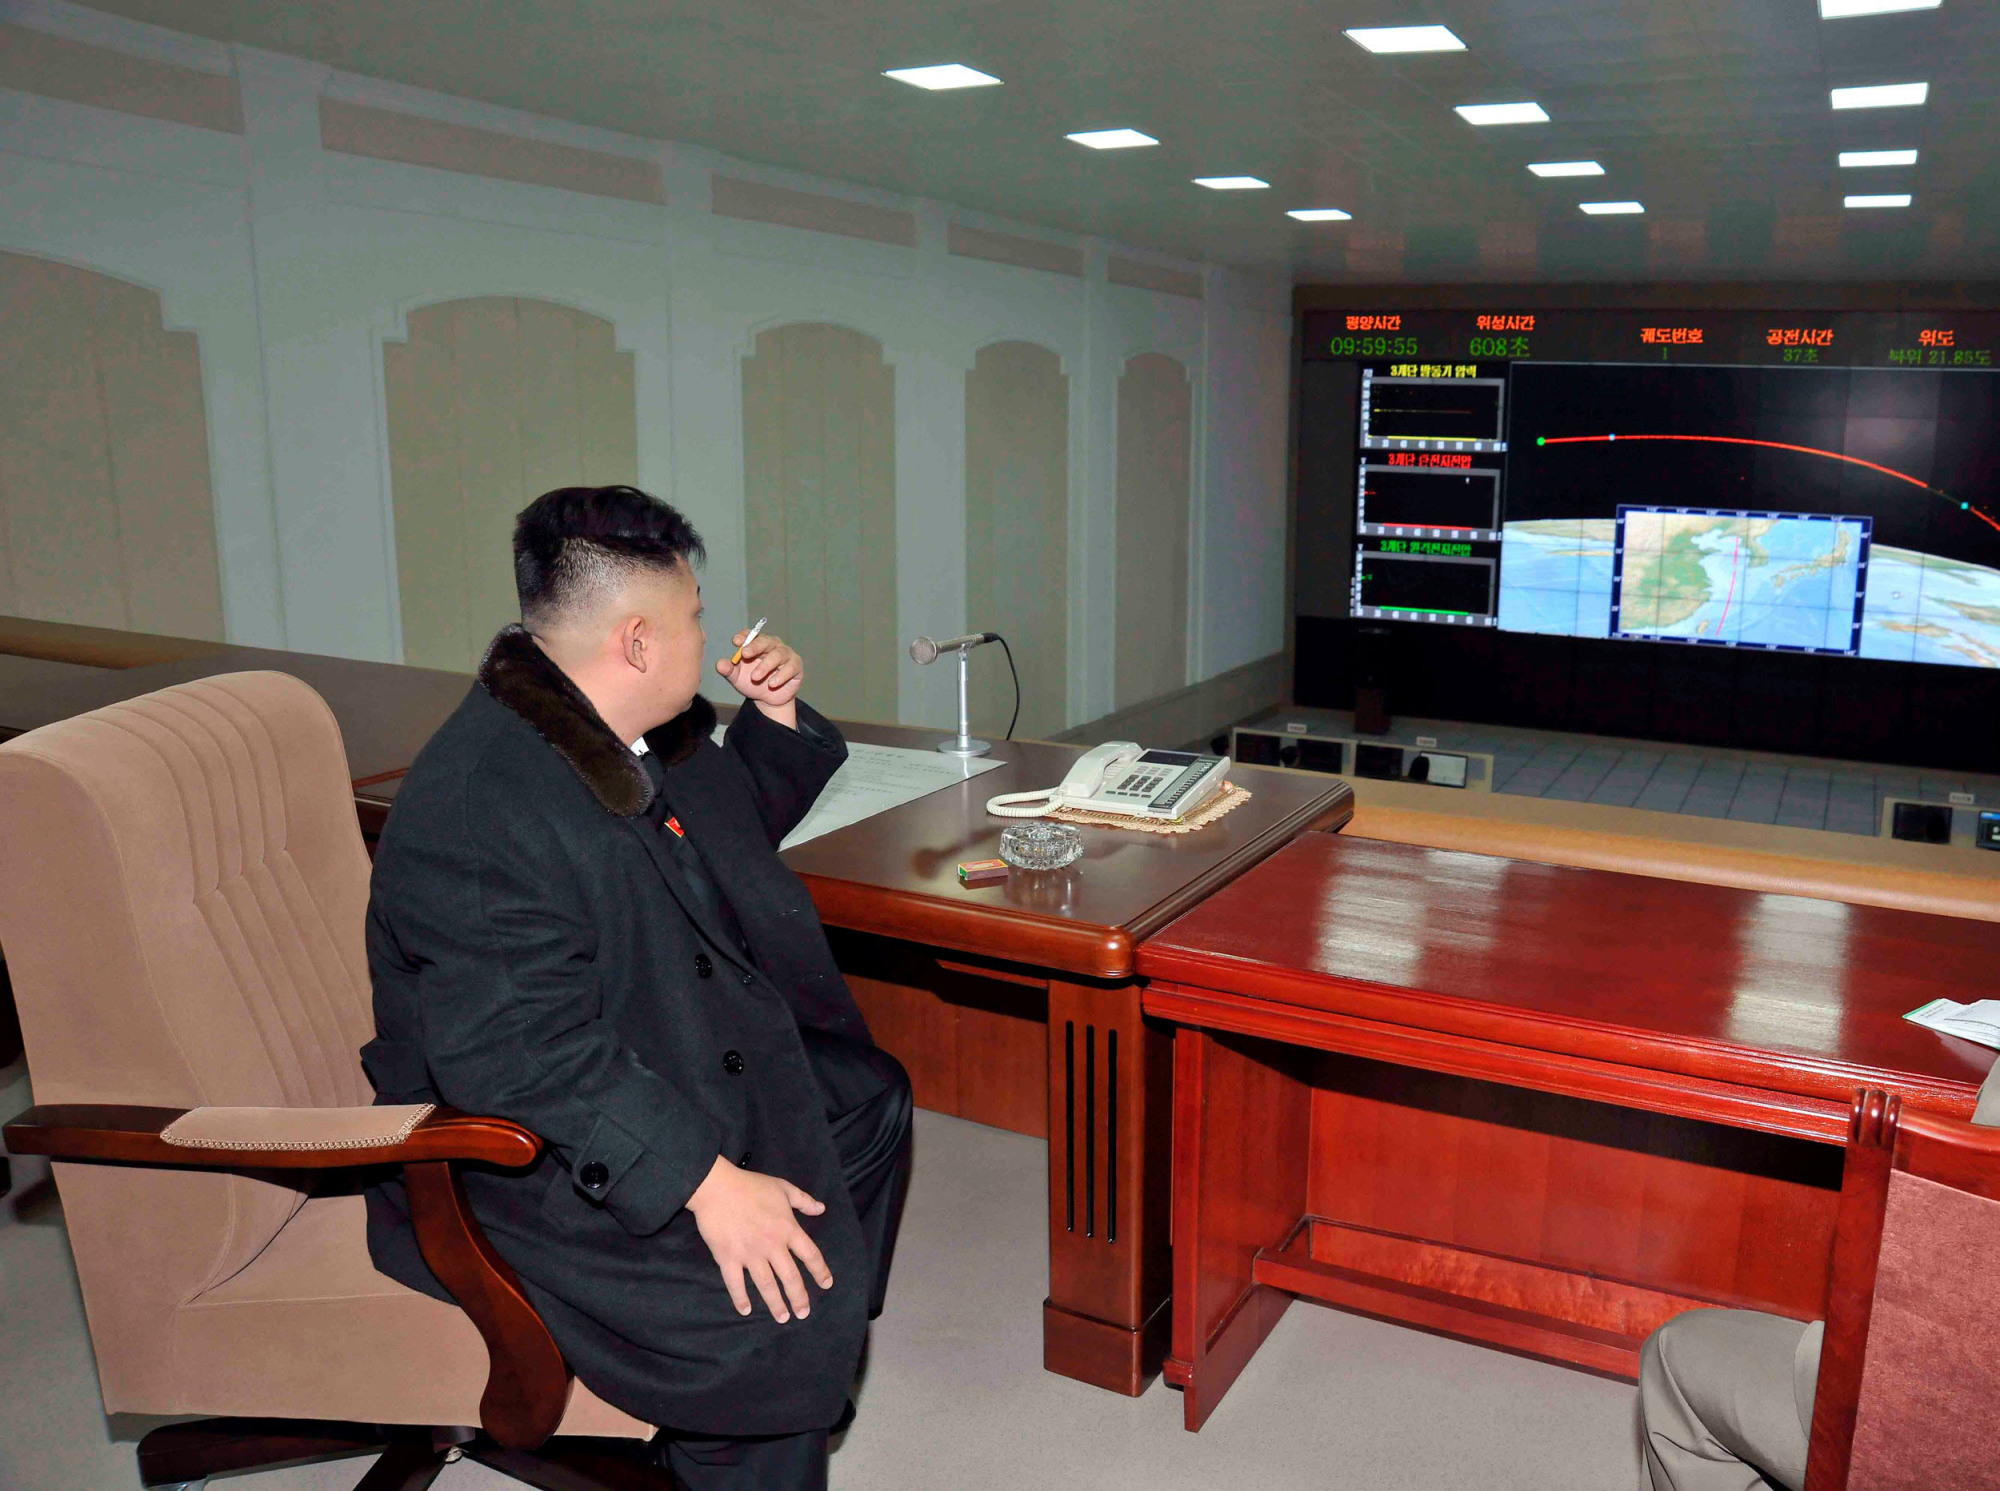 North Korean leader Kim Jong Un smokes a cigarette at the General Satellite Control and Command Center following the launch of the Unha-3 rocket at West Sea Satellite Launch Site in North Pyongan province in December 2012. | REUTERS